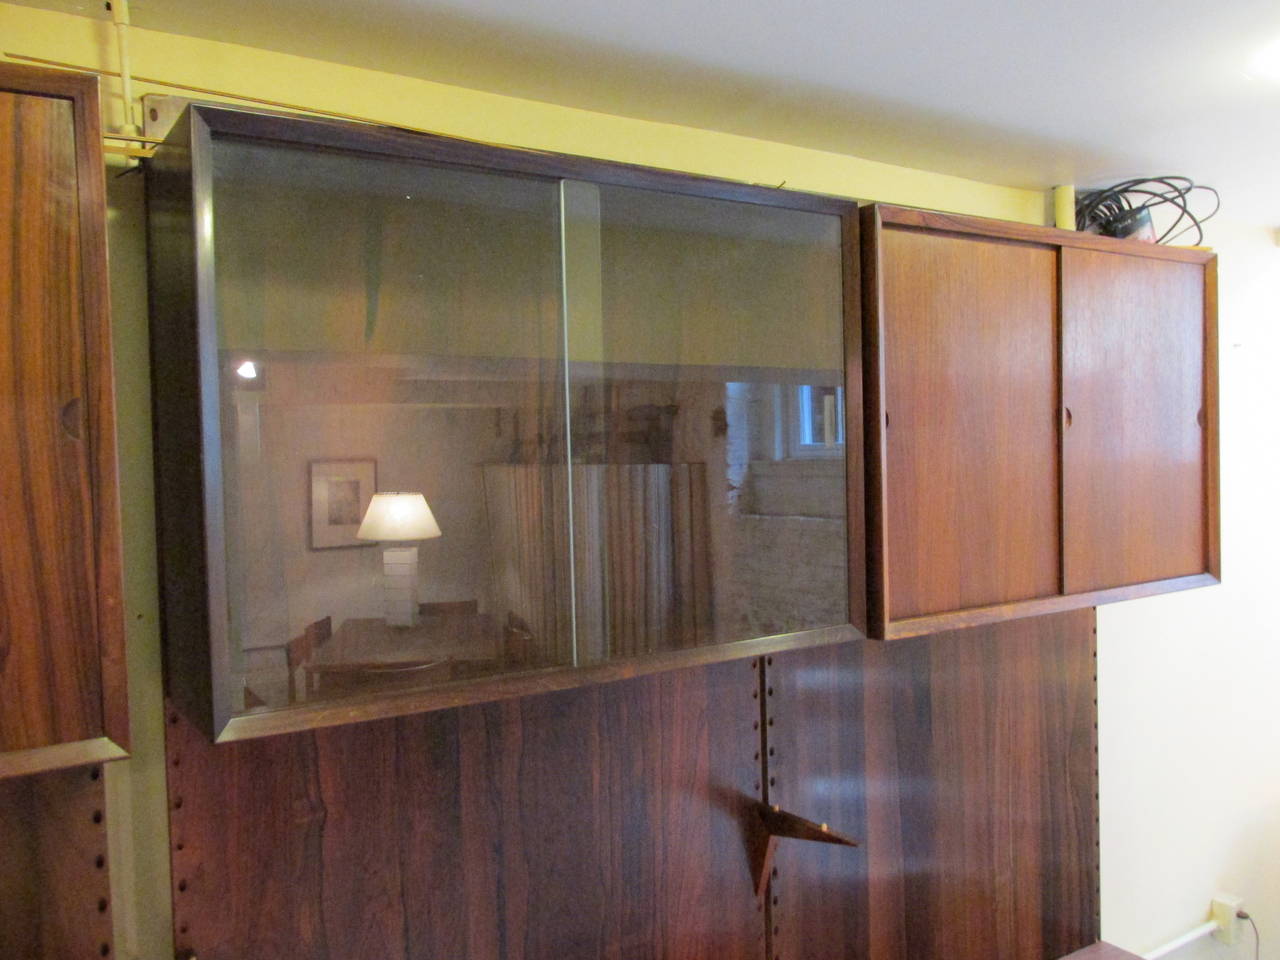 Large solid backed wall unit with six cabinets of sliding doors and drawers and two glass shelves. The back panels mount to the wall and cabinets and shelves are supported via angled wooden pegs. Several holes have been cut for electrical cords but